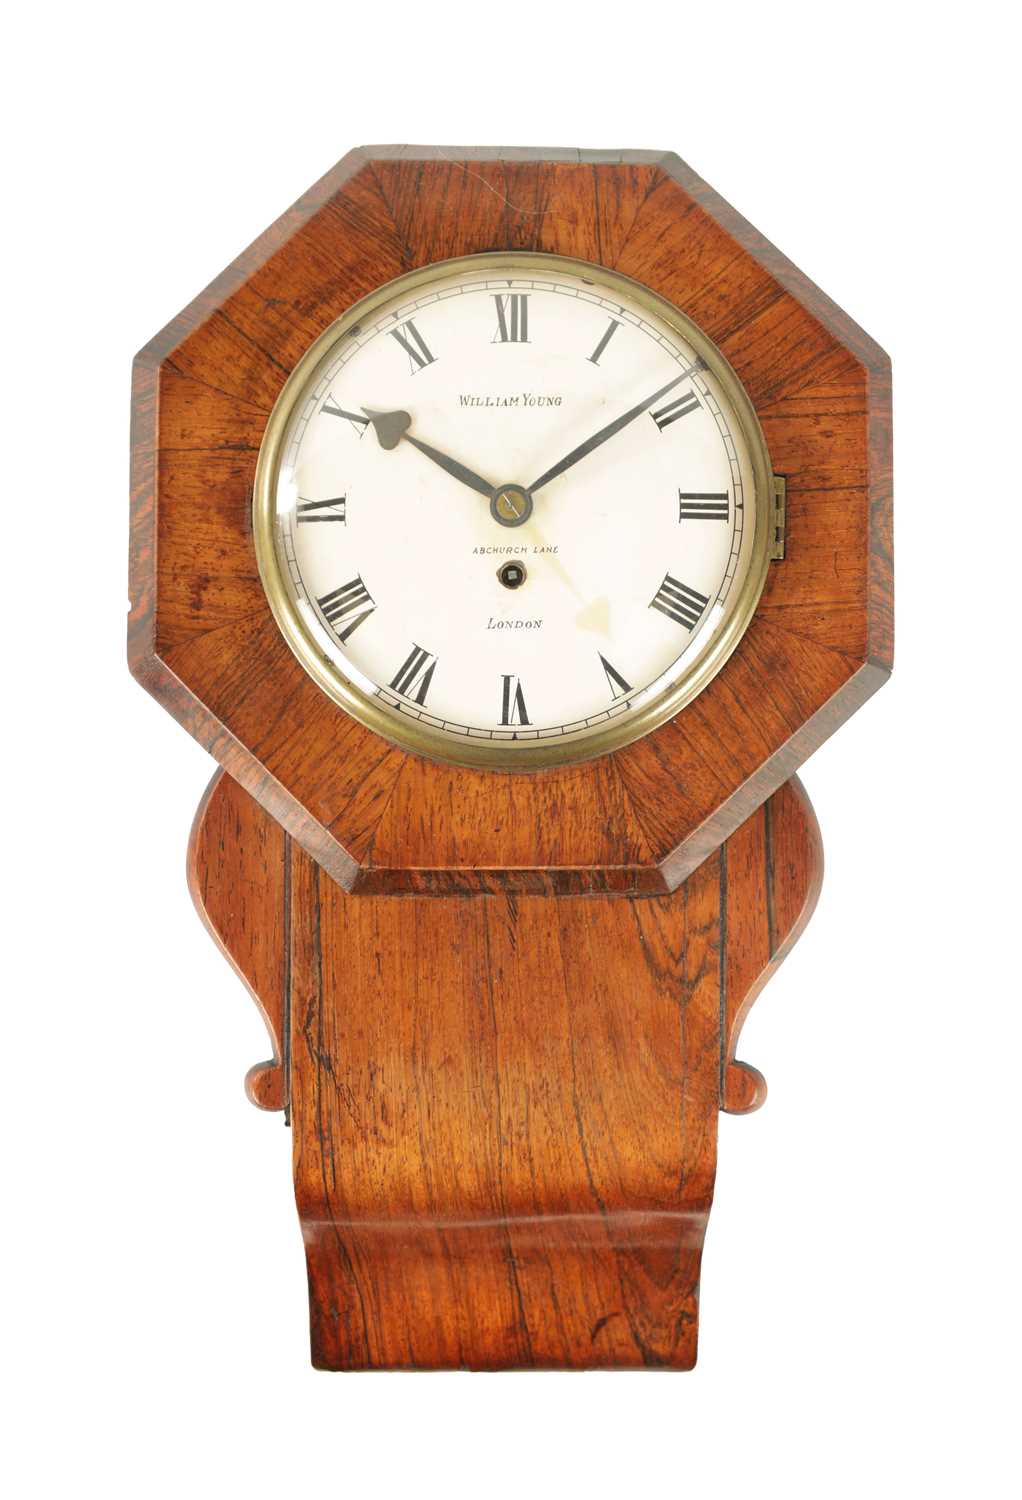 WILLIAM YOUNG, ABCHURCH LANE, LONDON. A RARE 19TH CENTURY 6” CONVEX ROSEWOOD DROP DIAL WALL CLOCK